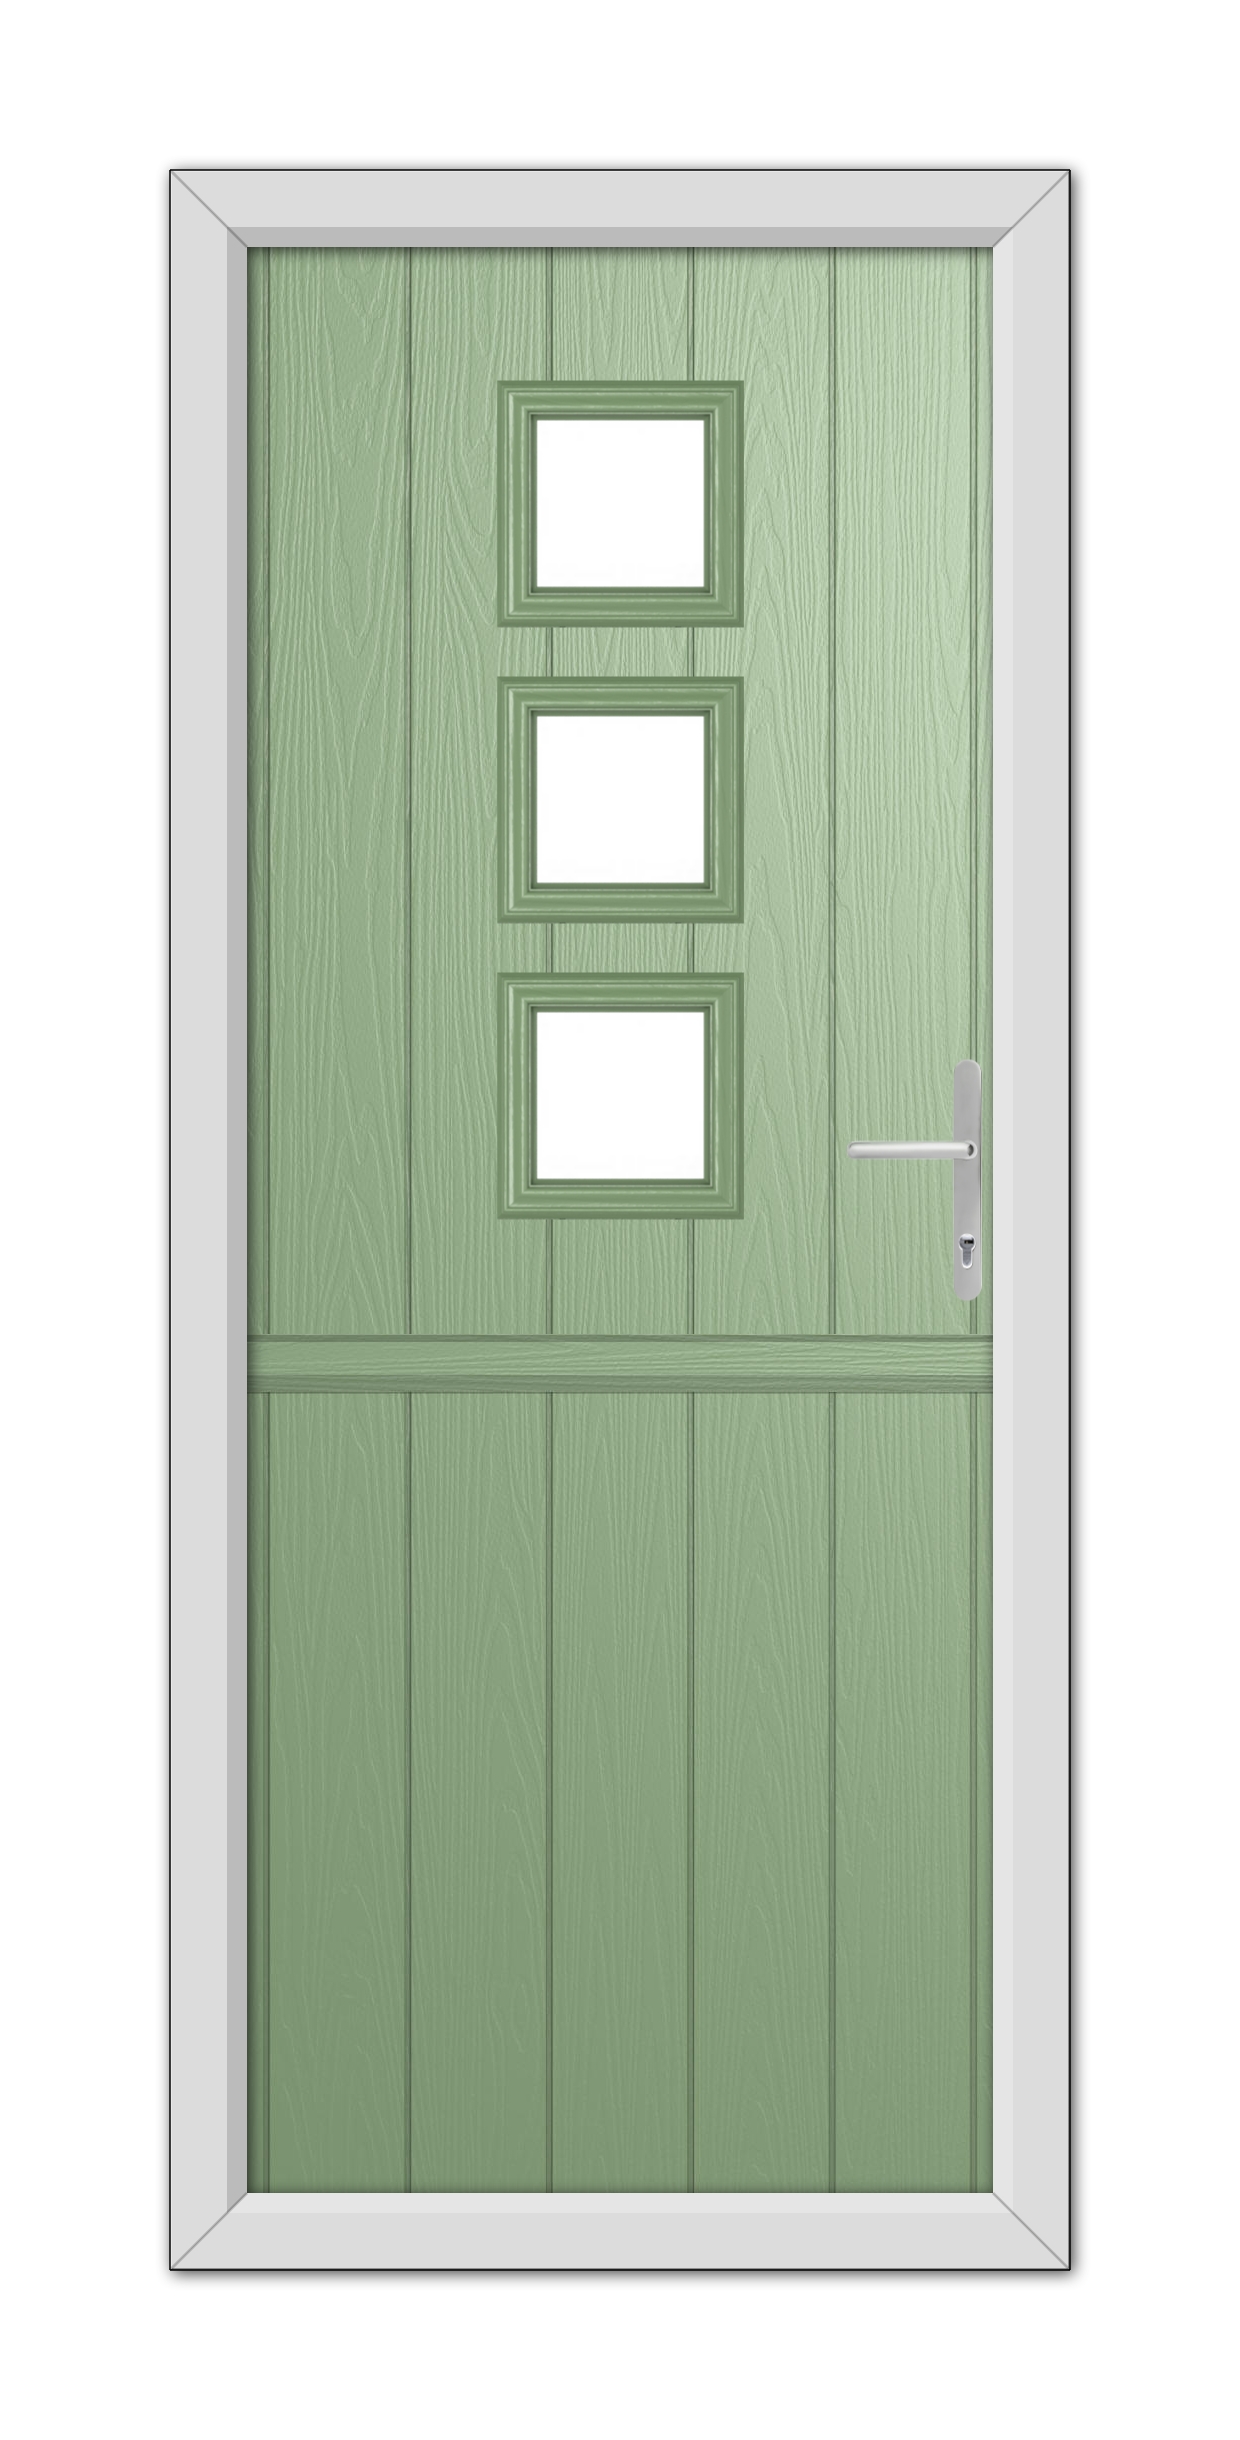 A Chartwell Green Montrose Stable Composite Door 48mm Timber Core with three rectangular windows and a chrome handle, set in a white frame.